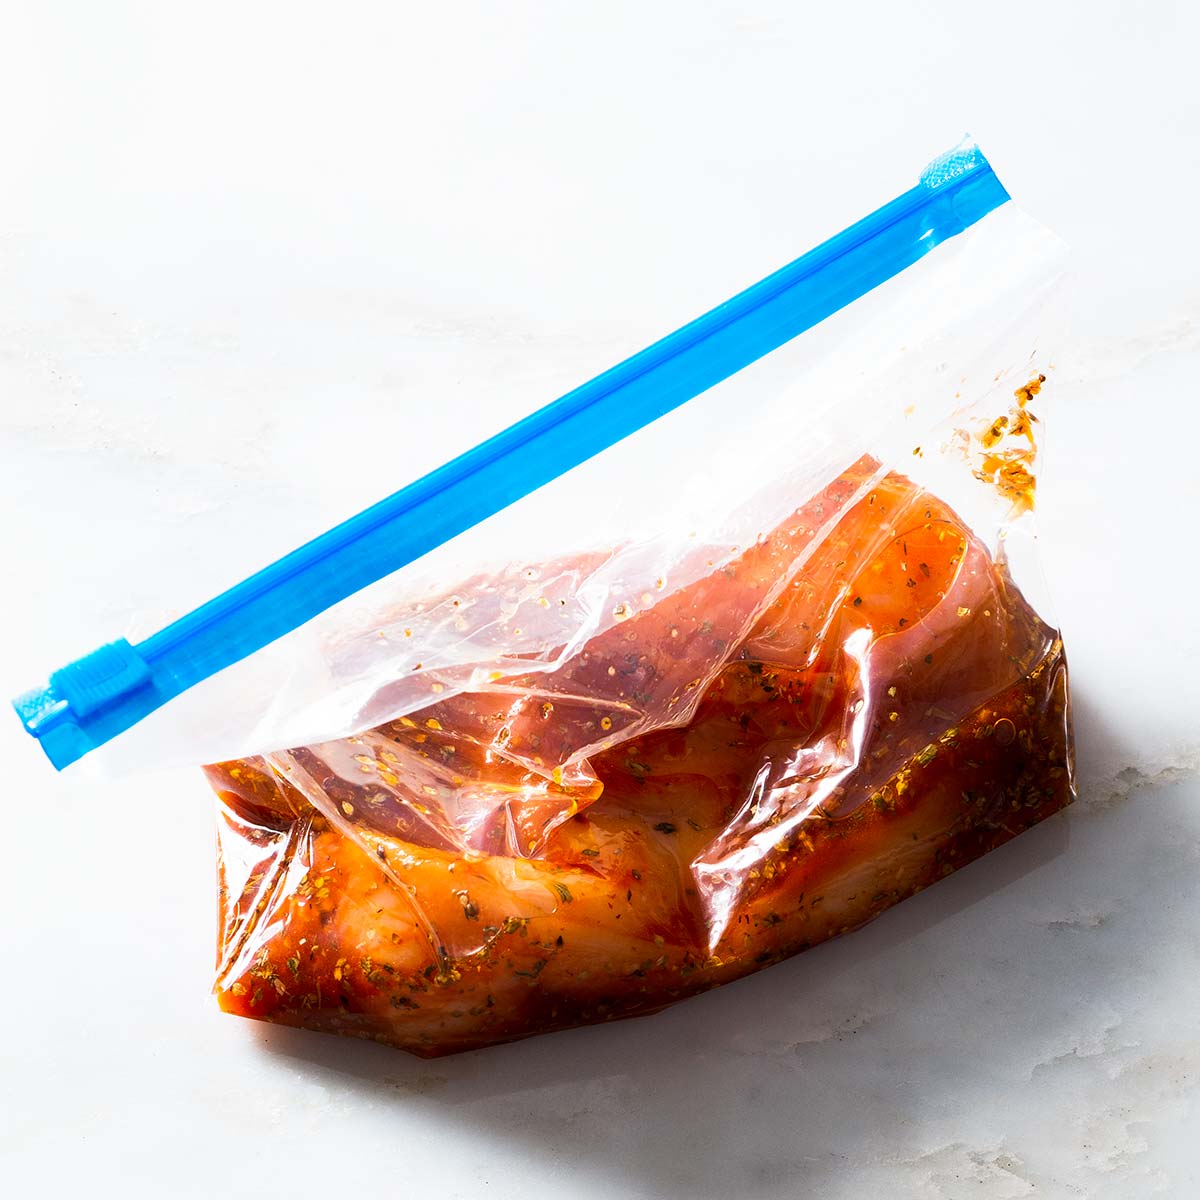 Raw chicken with honey chili marinade in a plastic bag.